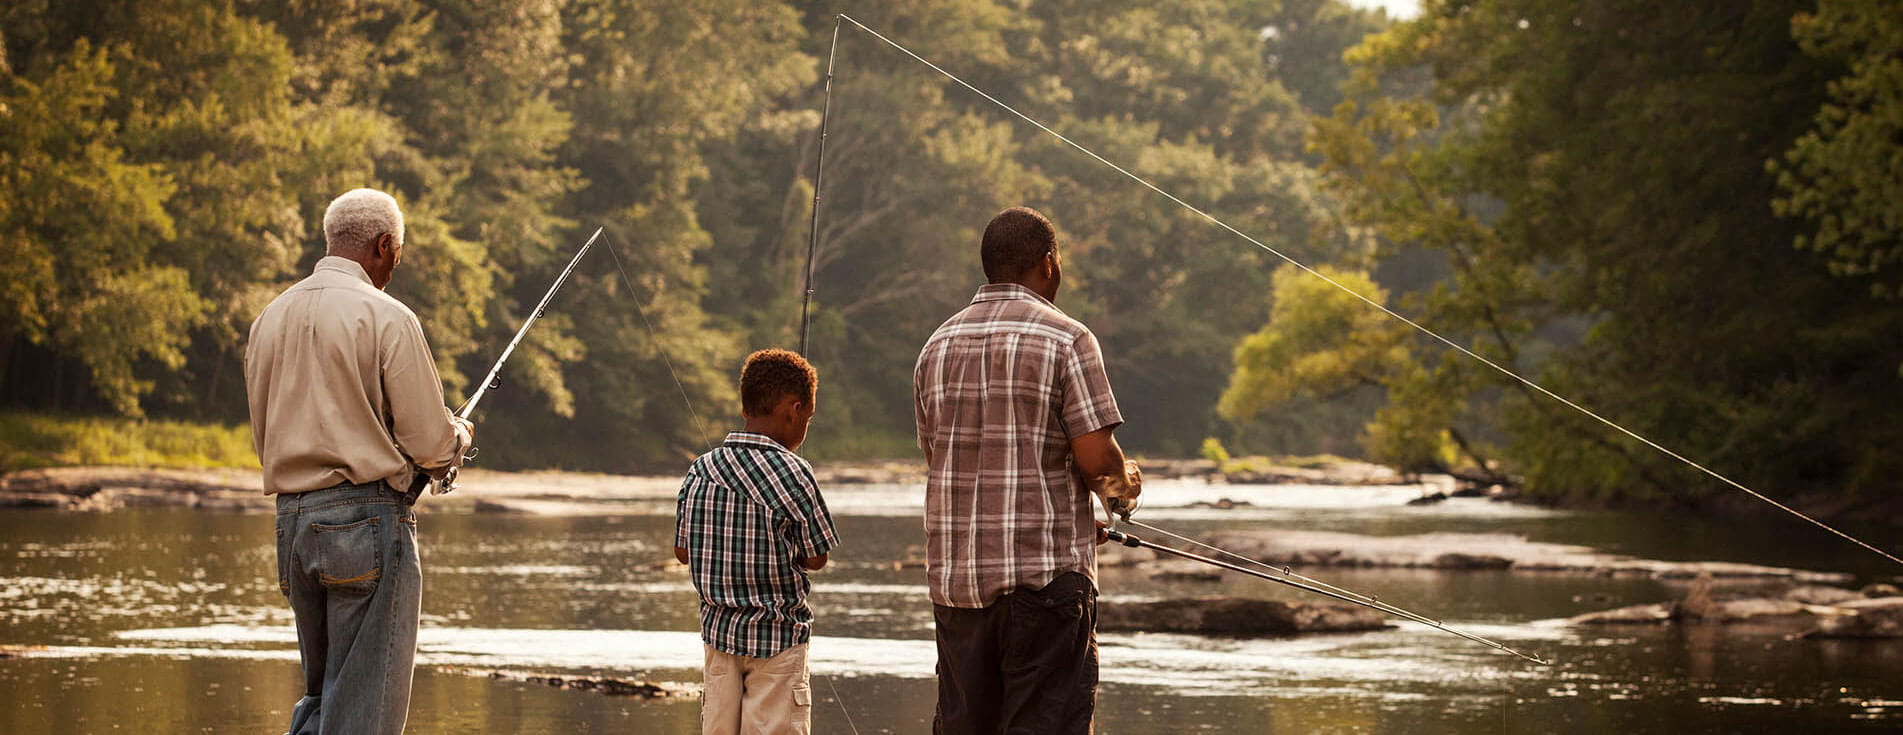 Family fishing together.